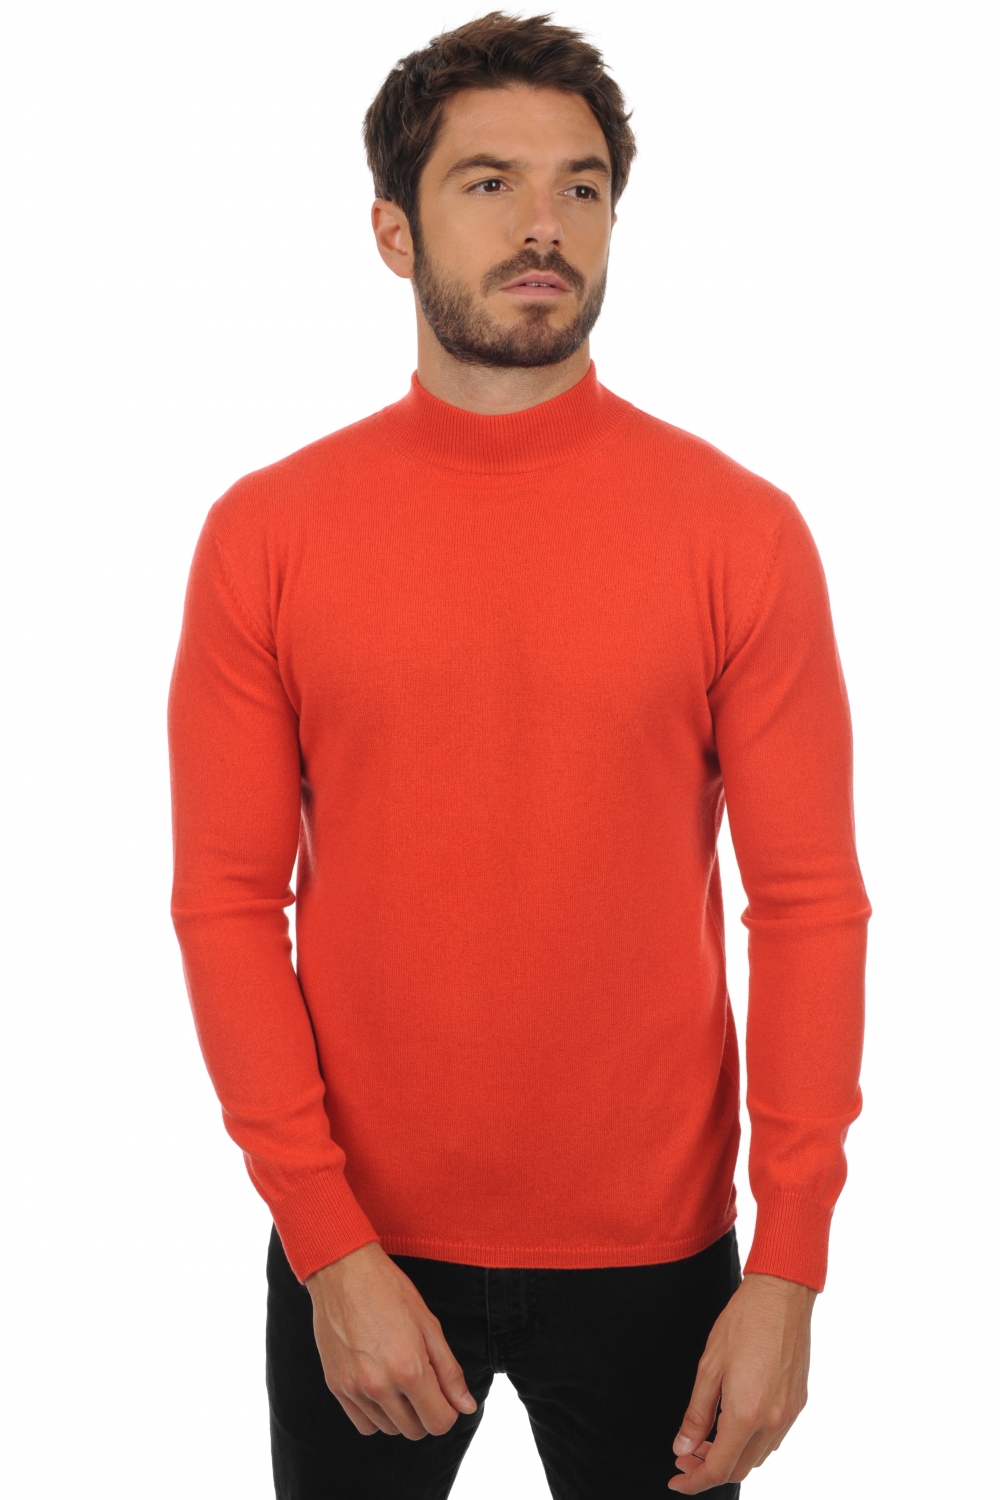 Cachemire pull homme col roule frederic corail lumineux 2xl